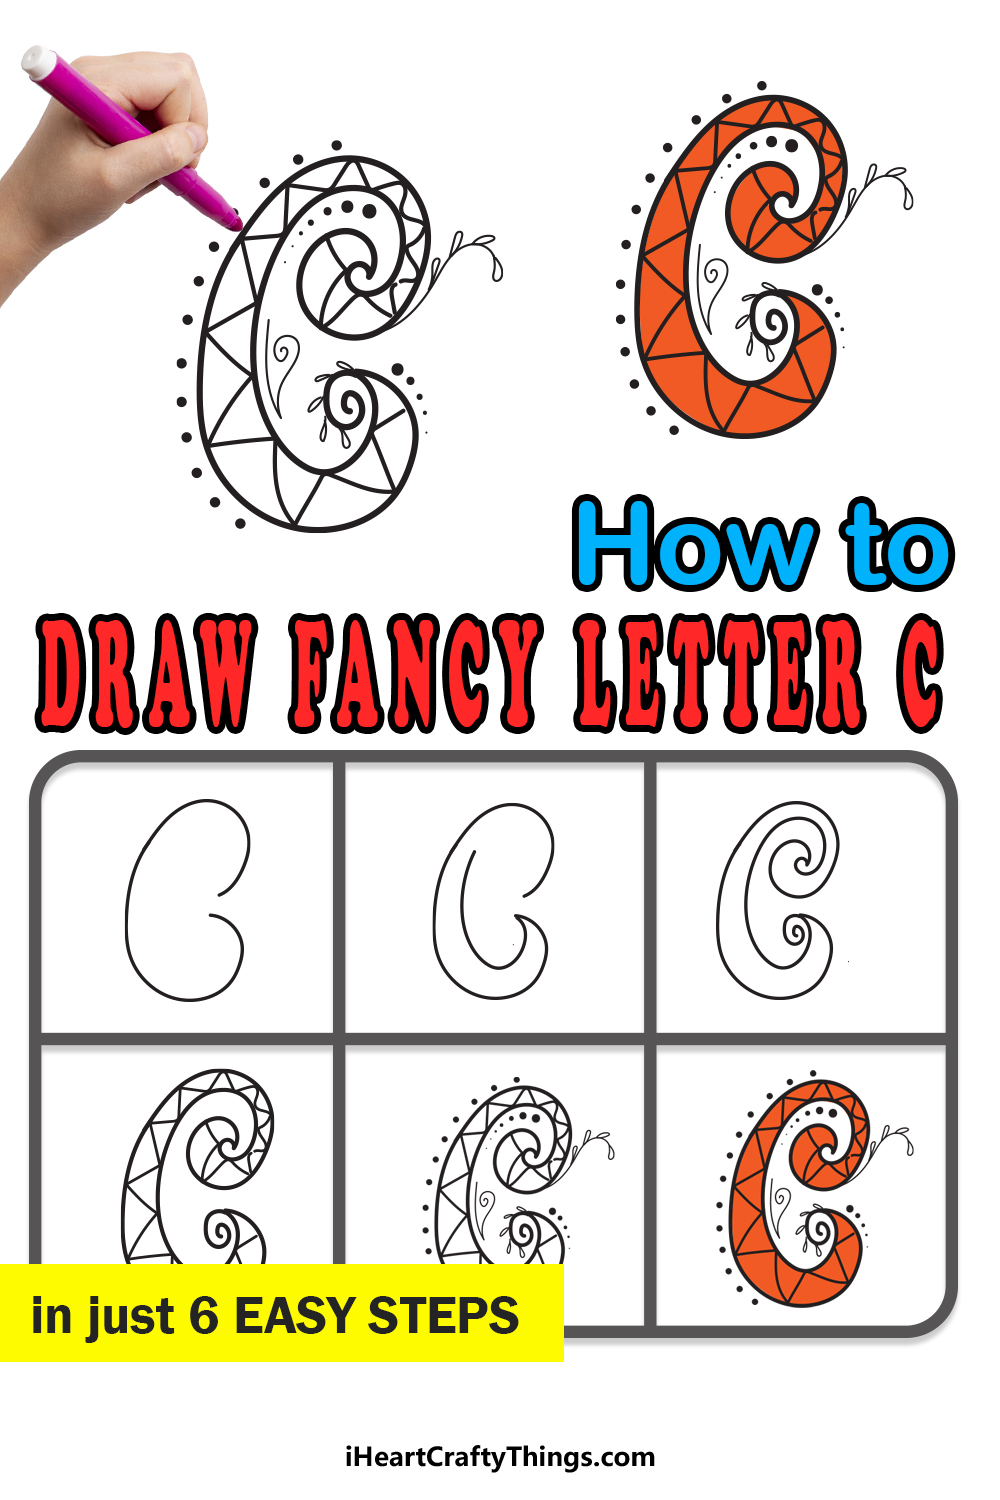 How To Draw Your Own Fancy C step by step guide